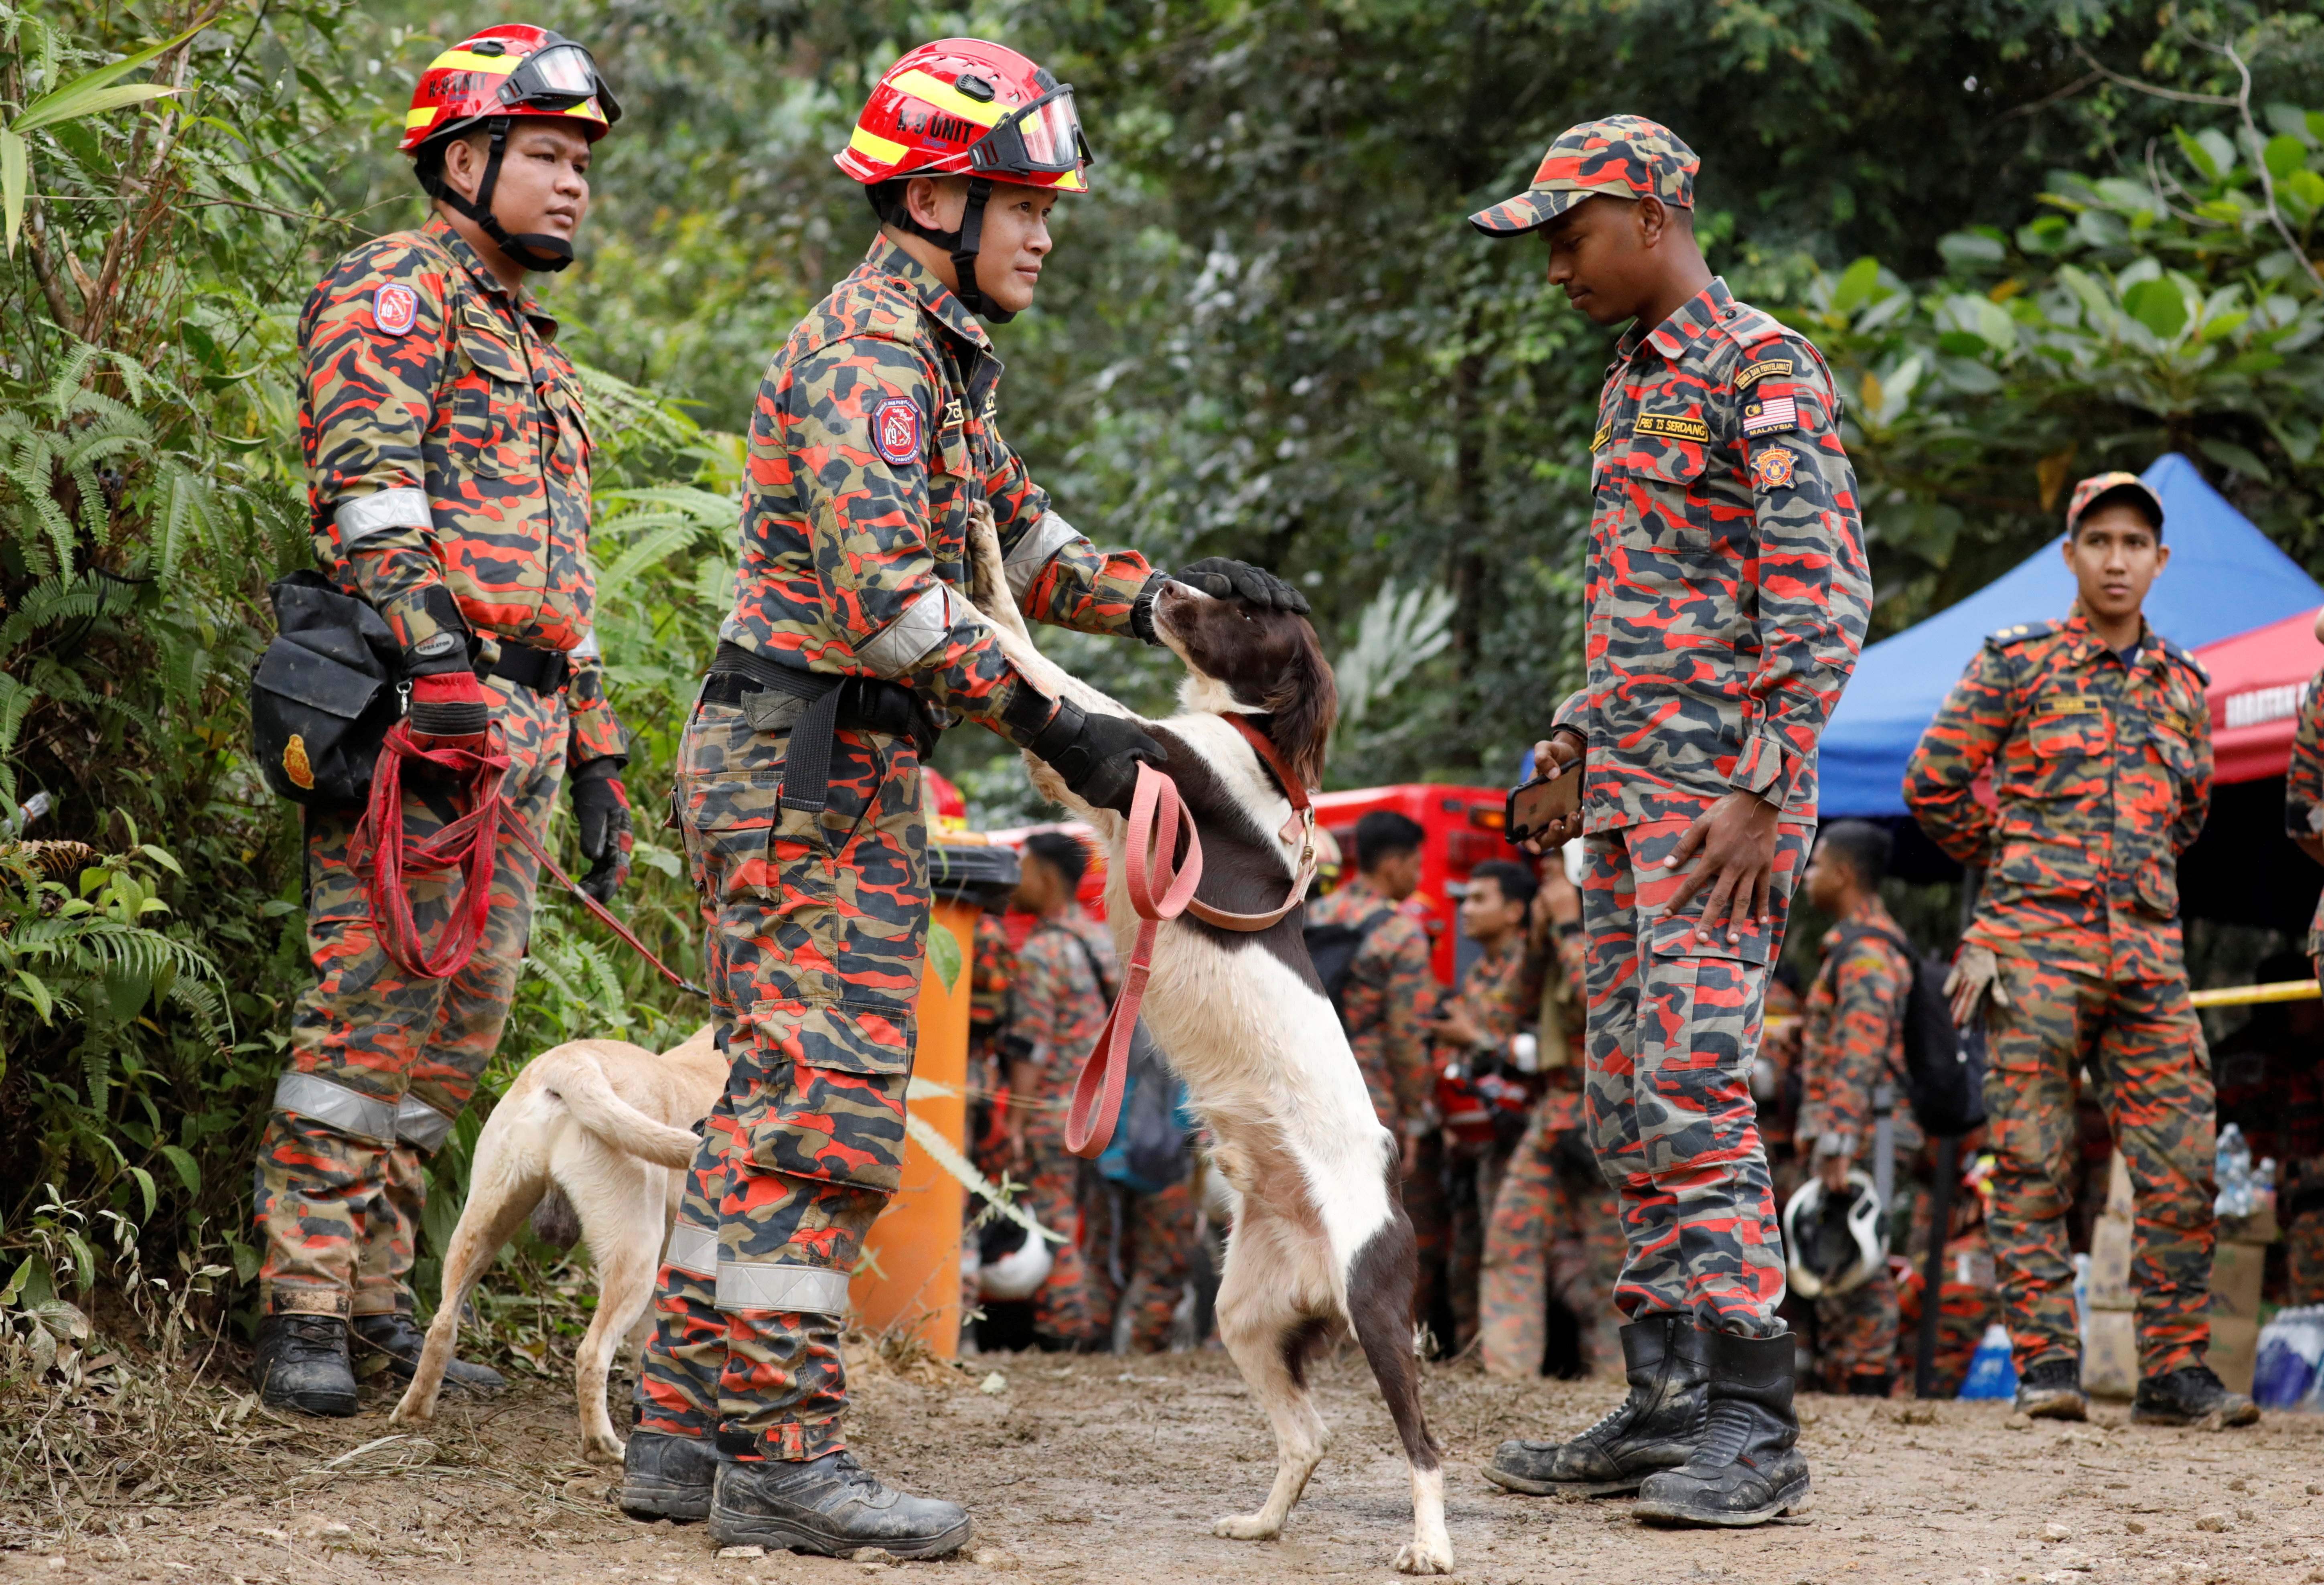 A rescuer crew member pats a sniffer dog being used to aid in the search for victims of the landslide in Batang Kali